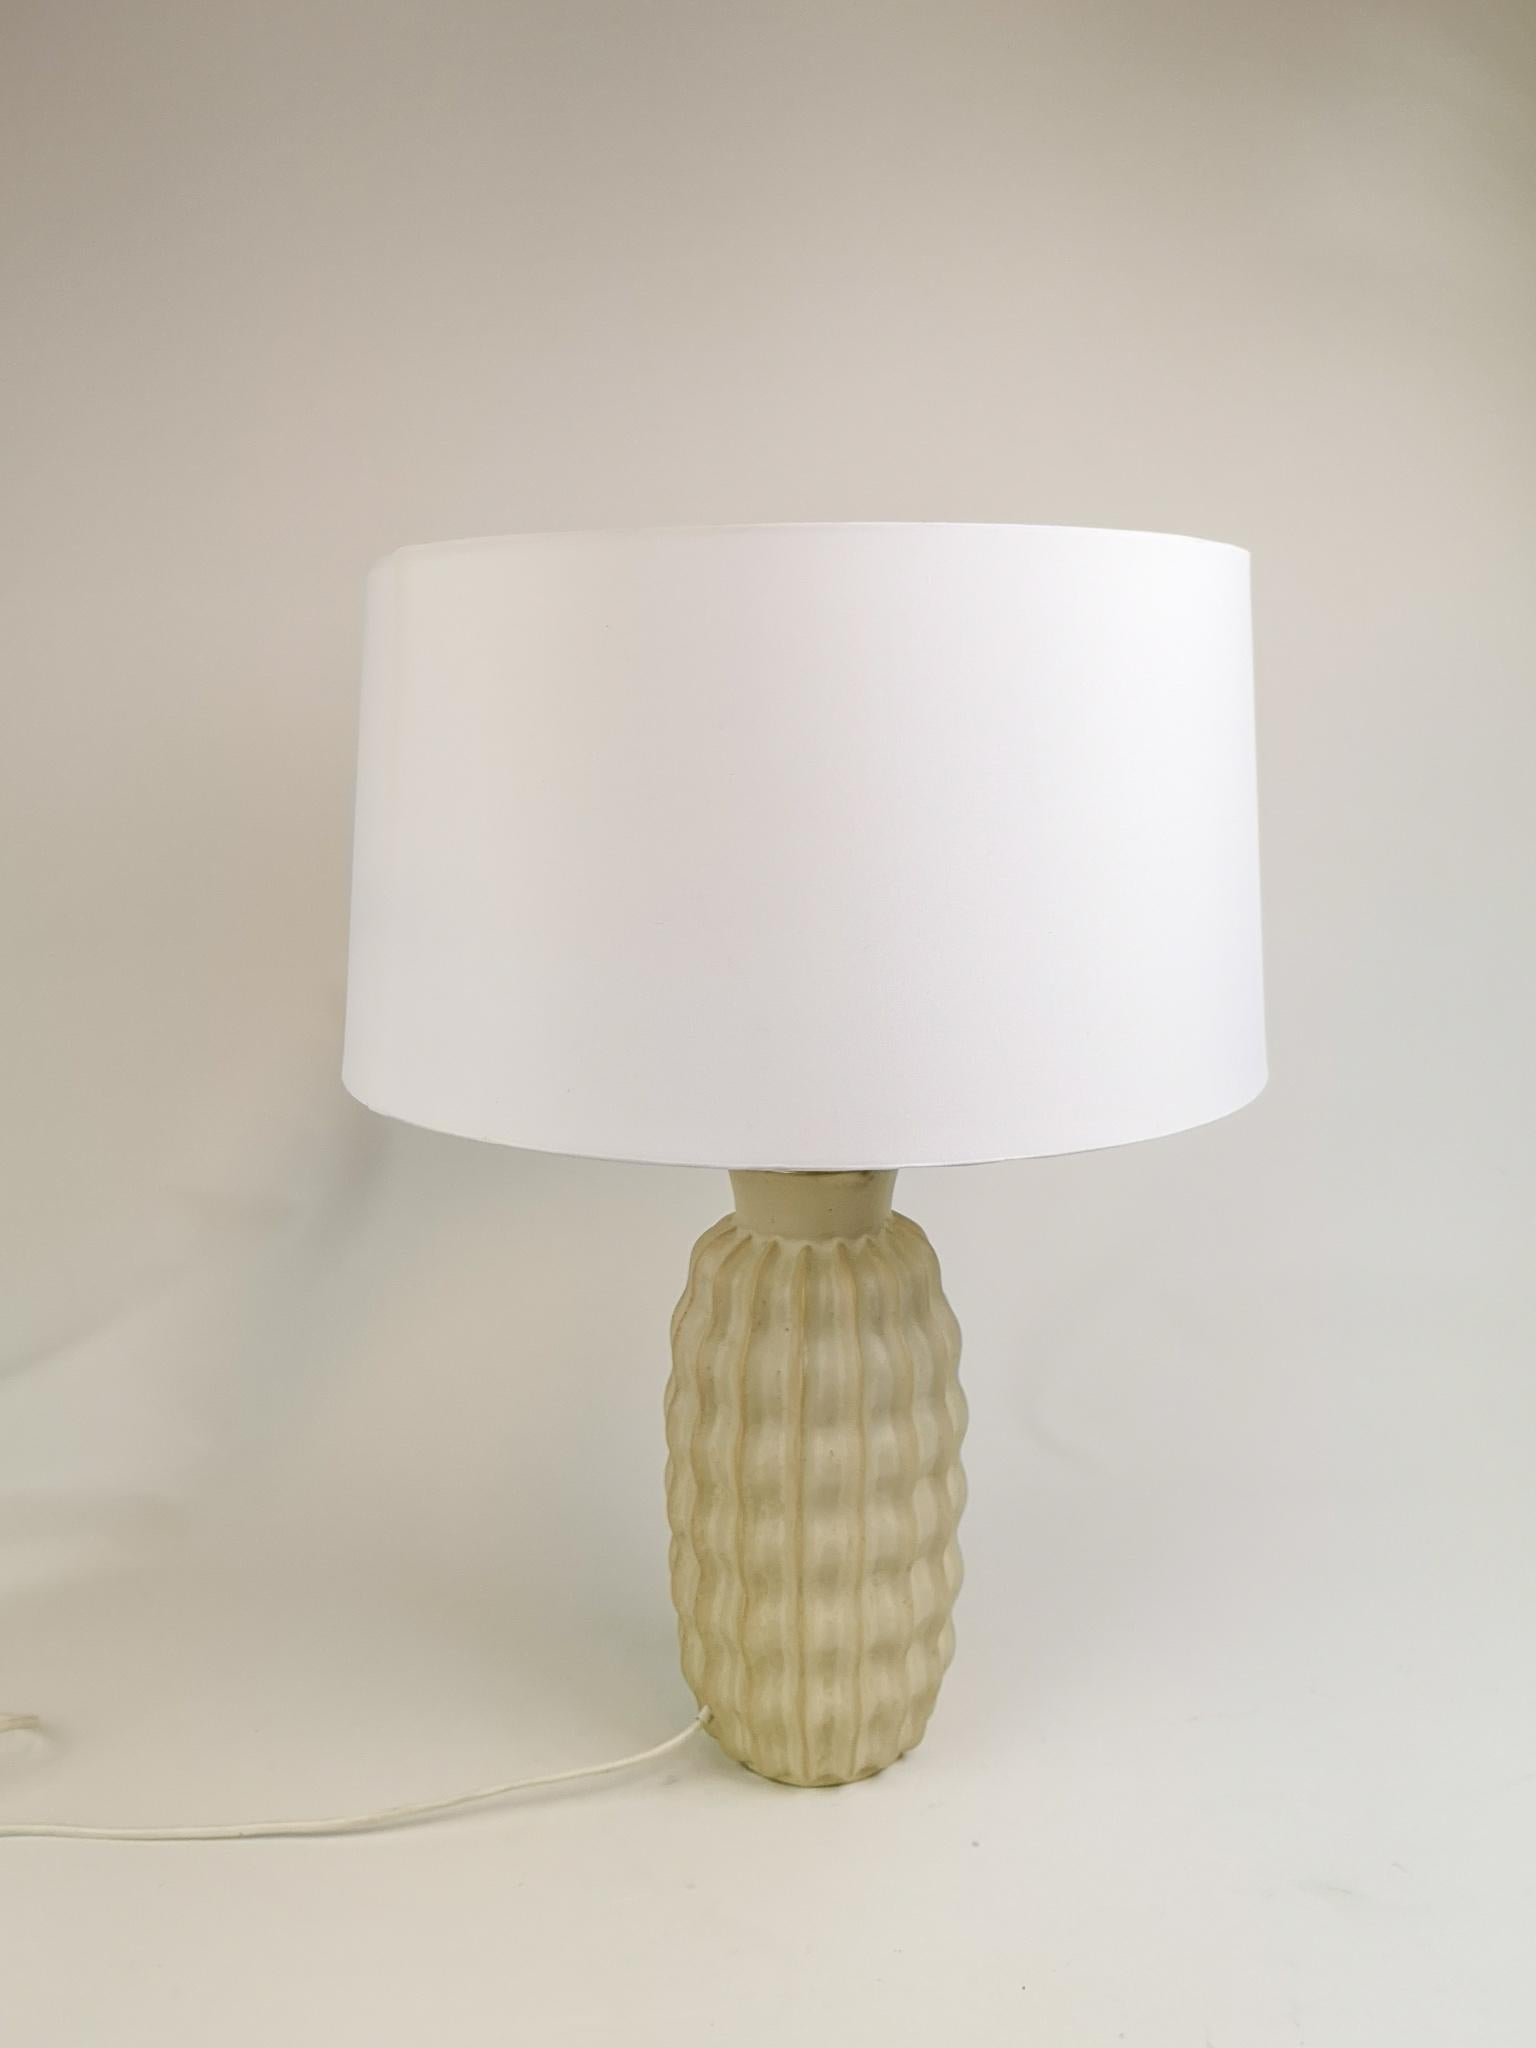 This wonderful ceramic Art Deco table lamp was made by Upsala Ekeby in Sweden 1930s-1940s.
It has an incredible form and figure and nice glaze. The shade is not original but can be included if byer wants.

Good working condition, scratches on the